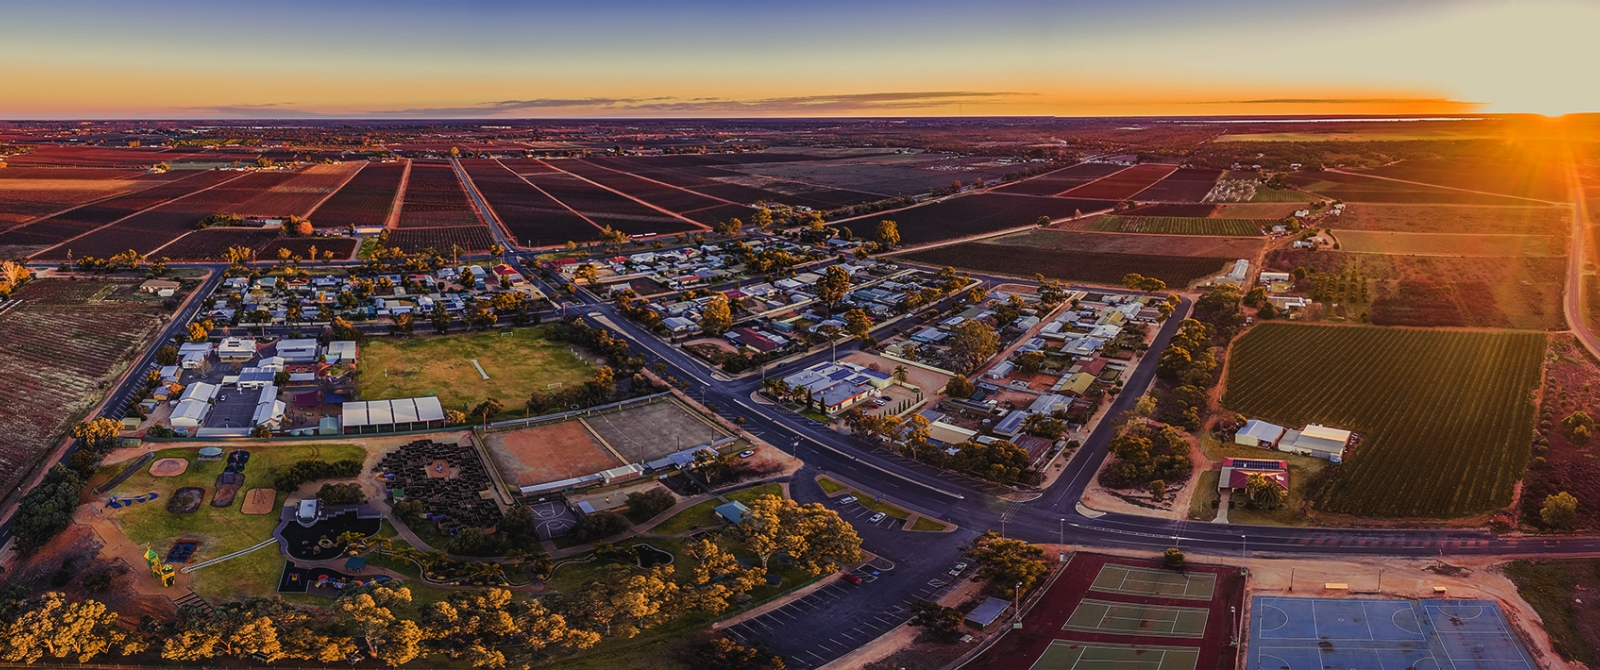 sunset aerial view of small town